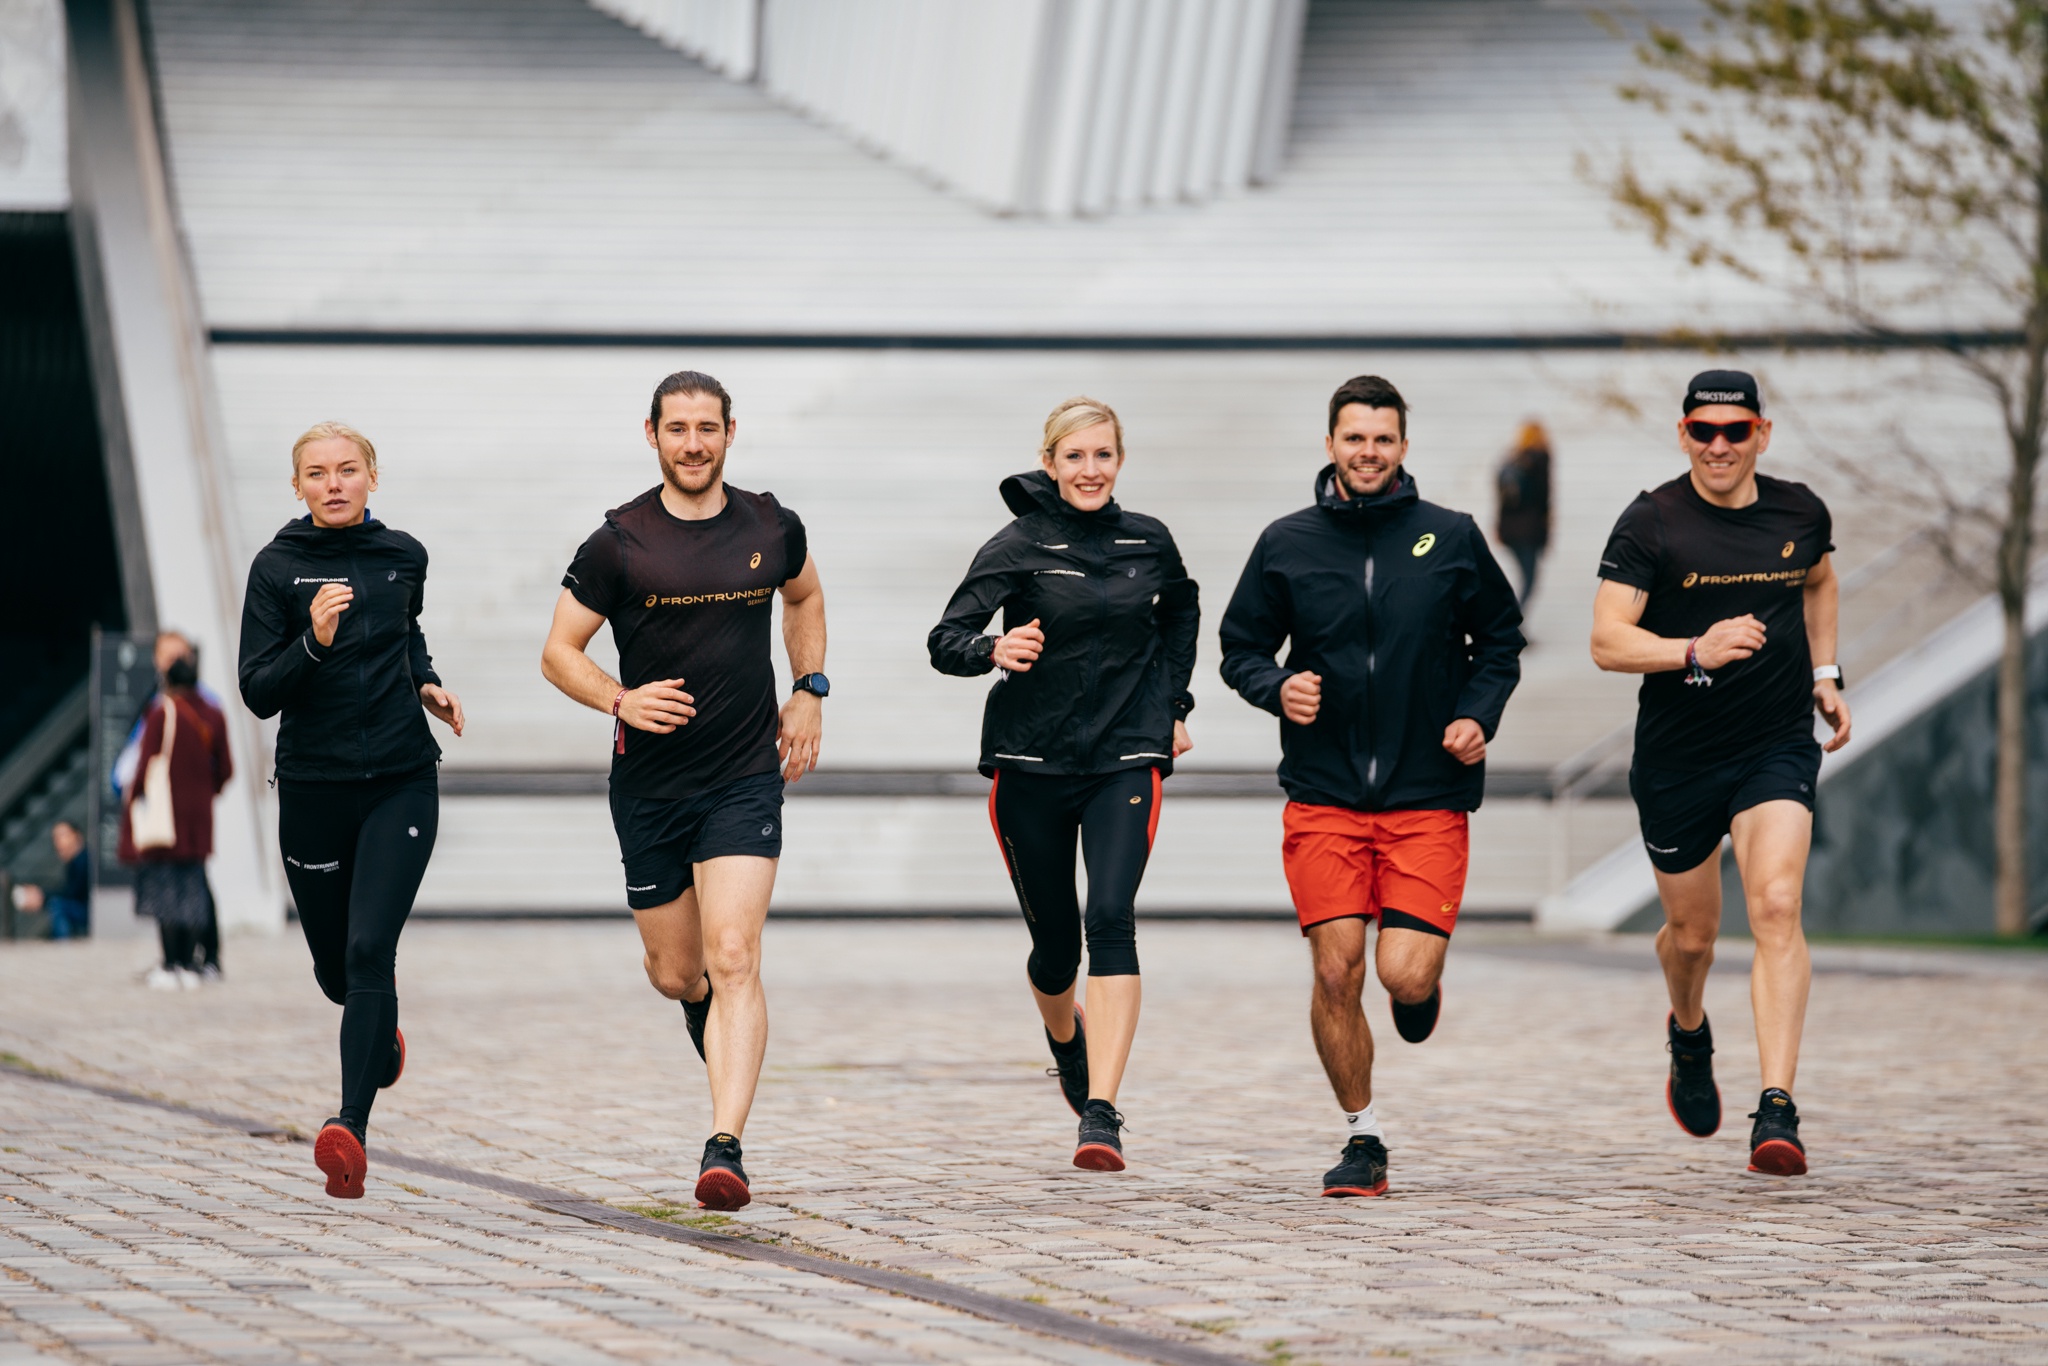 ASICS FrontRunner - It's a match – 20 reasons why